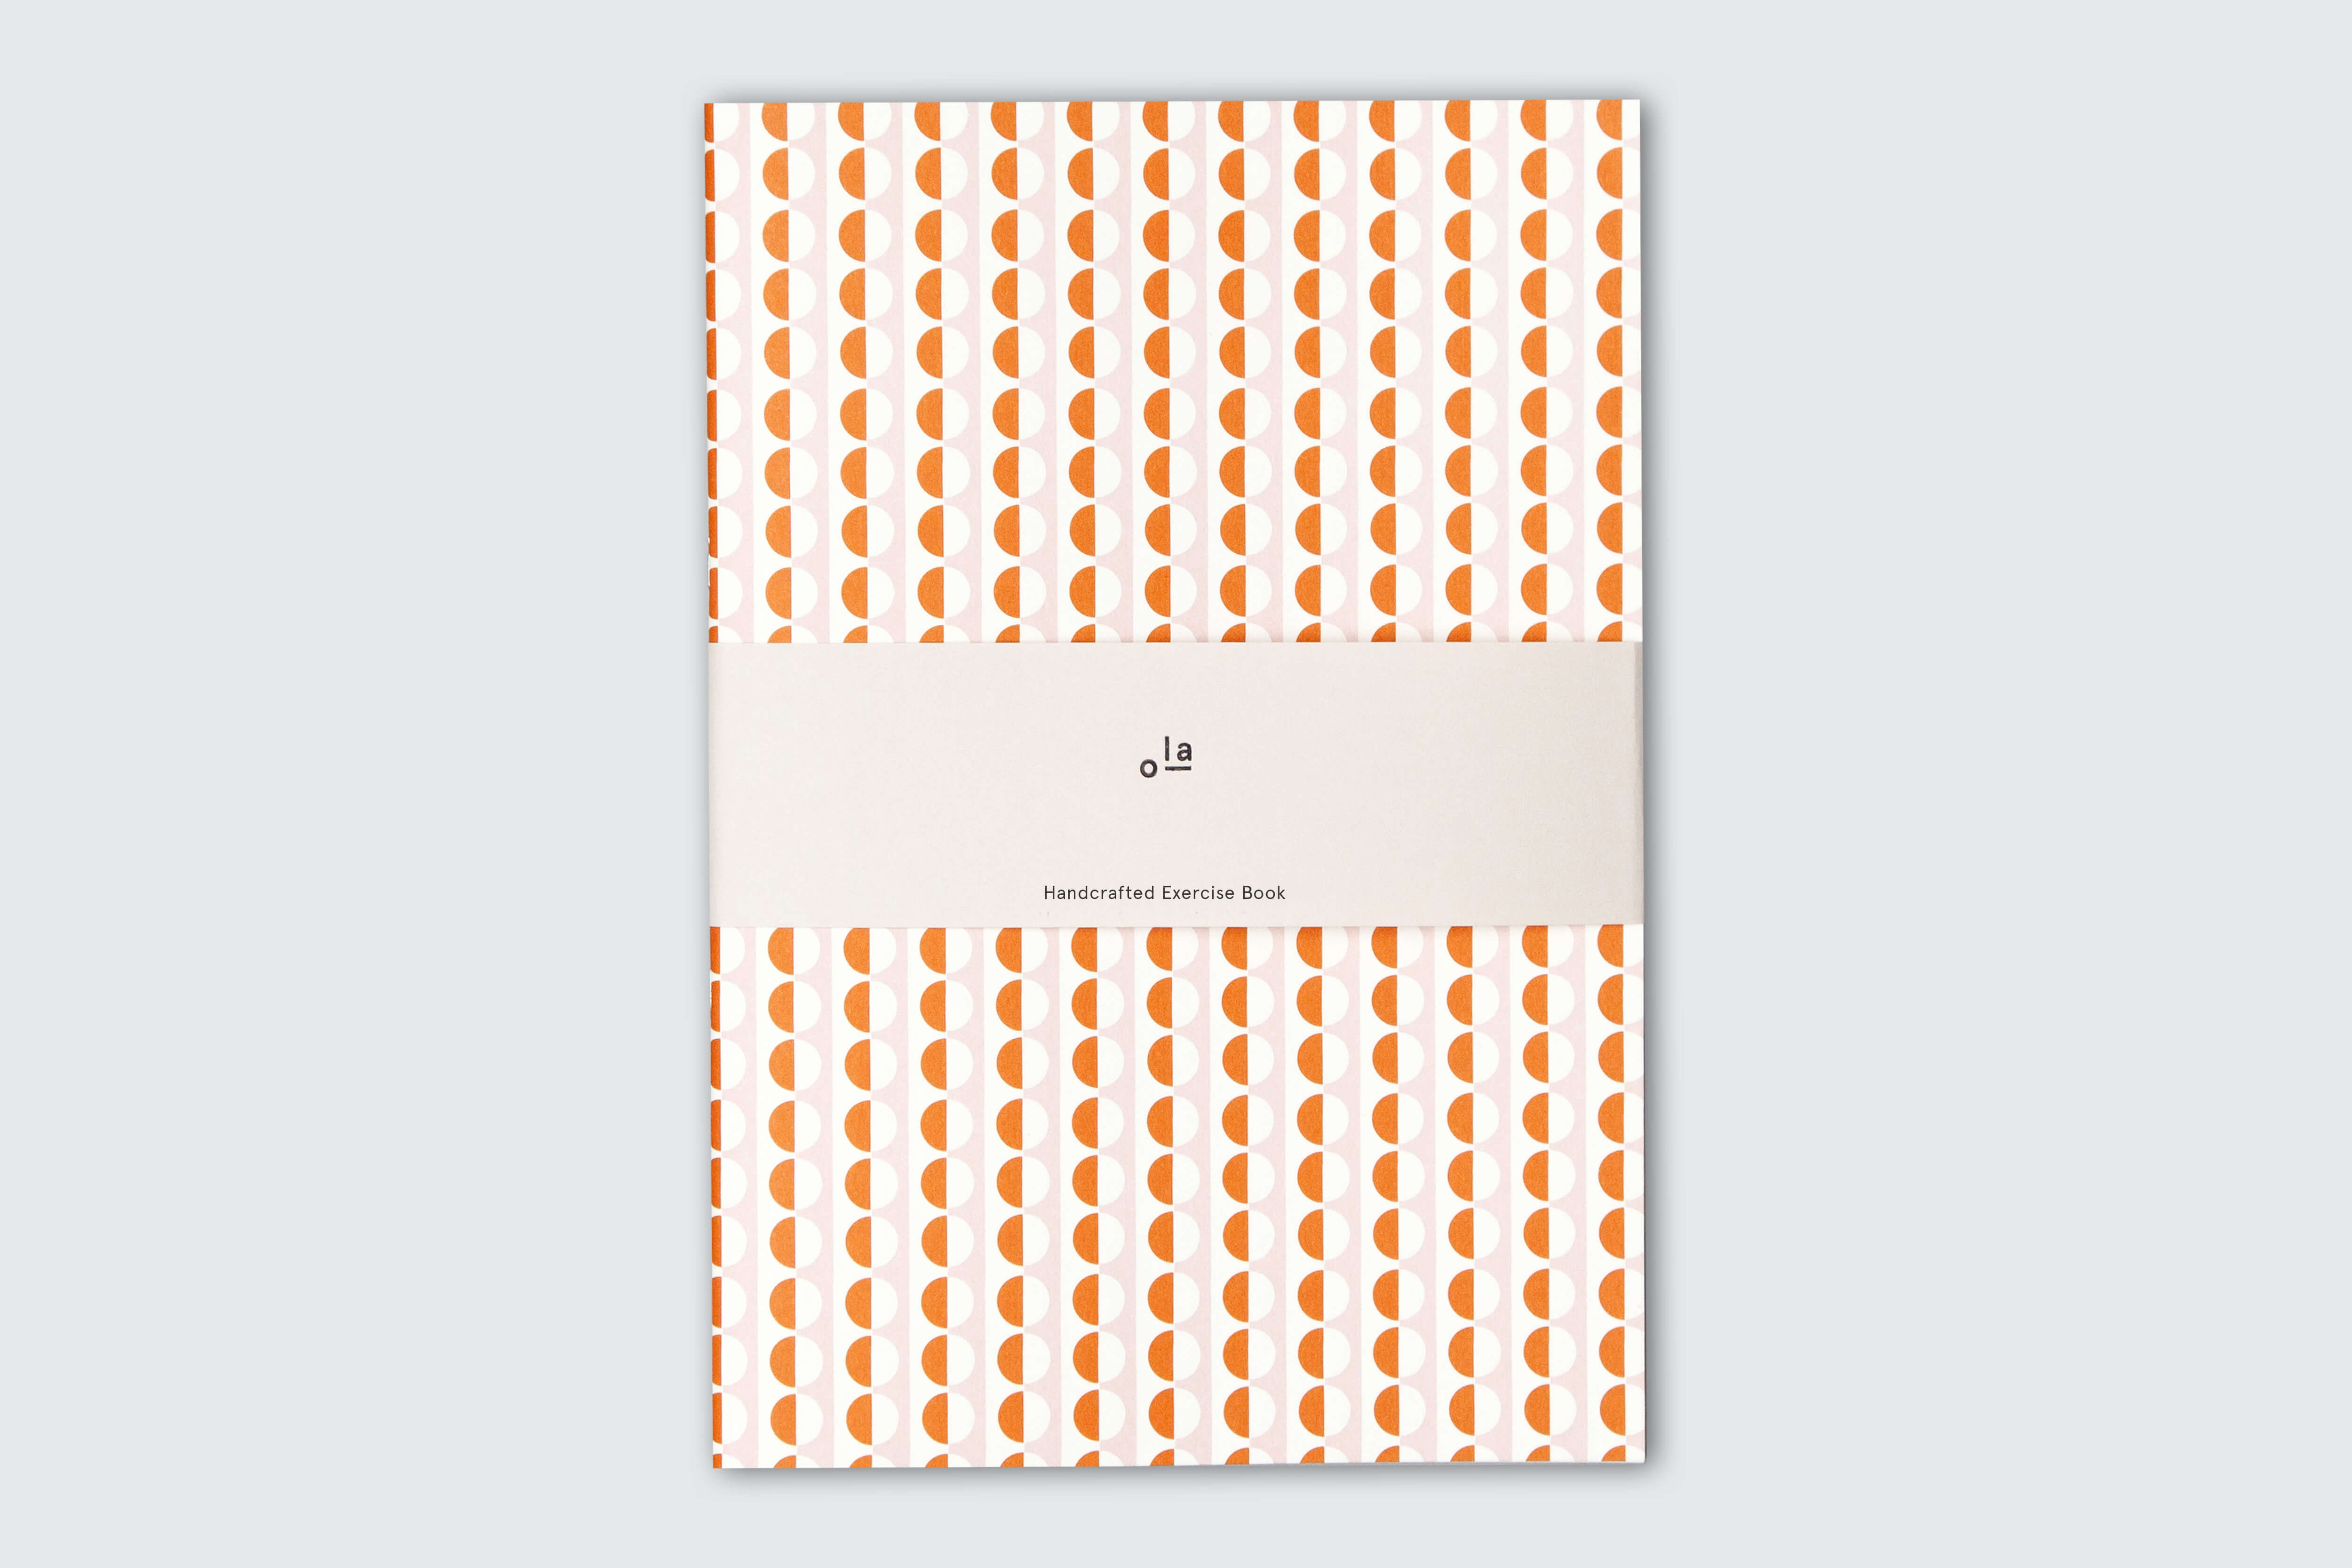 B5 Handcrafted Exercise Book | Sophie Print | Pink/Orange | Plain Pages | by Ola - Lifestory